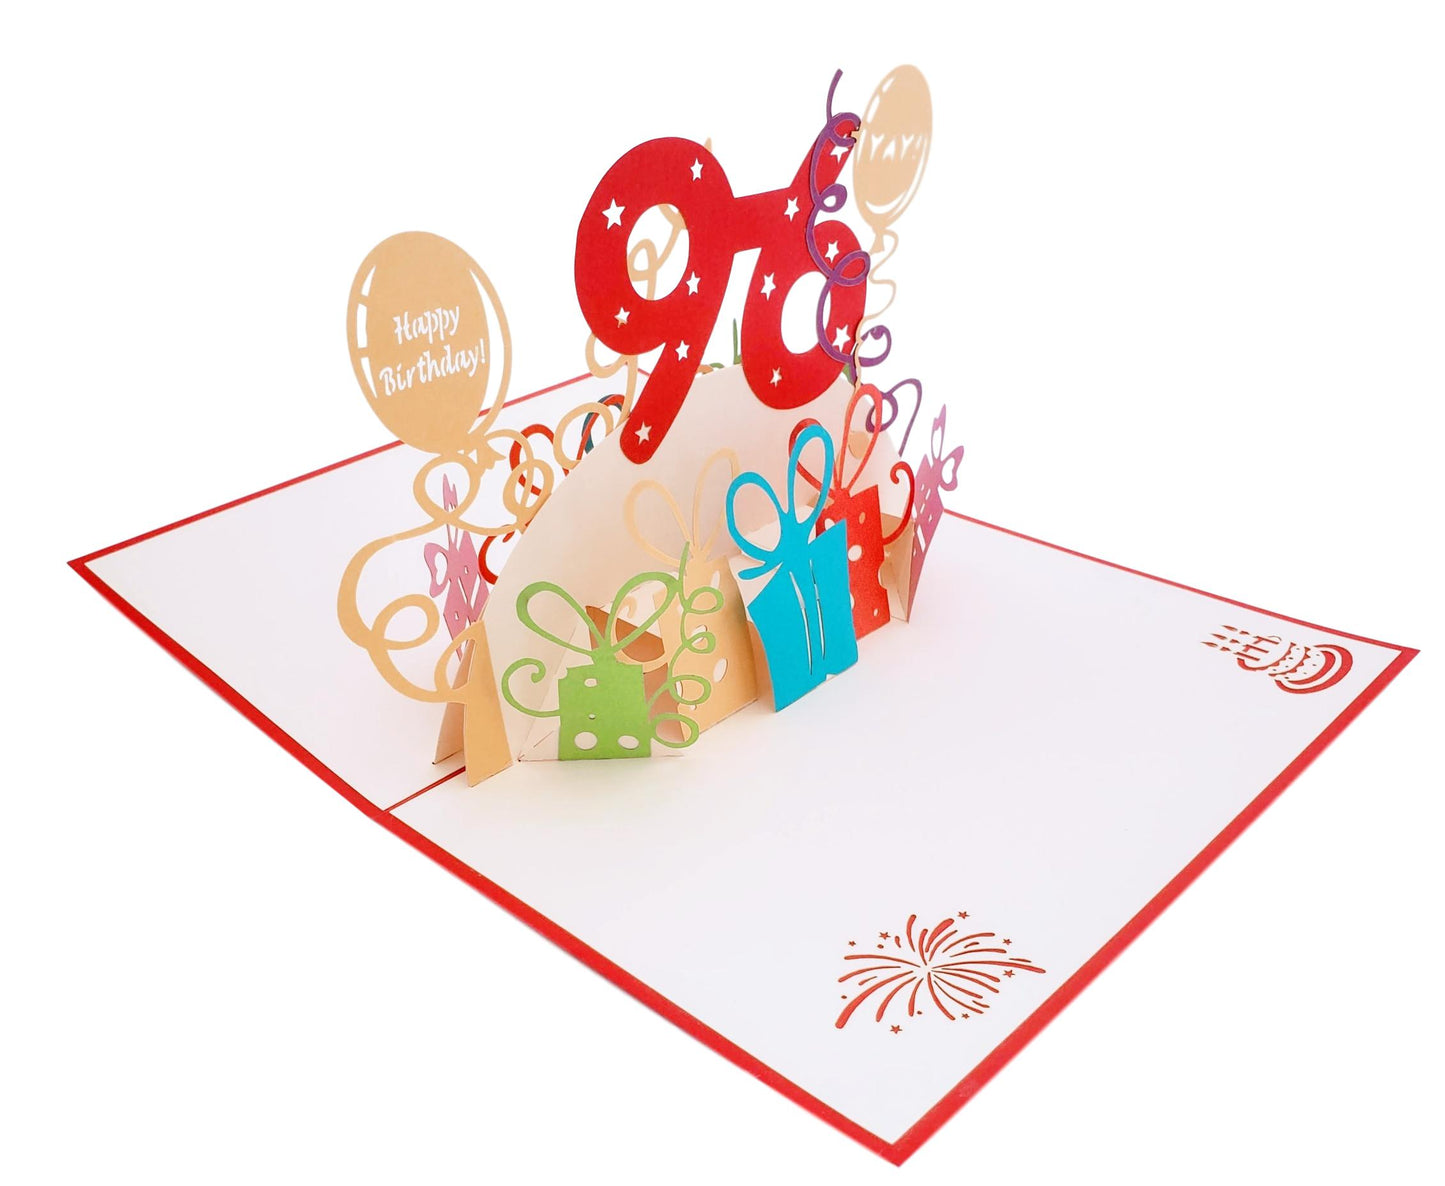 Happy 96th Birthday with Presents 3D Pop Up Greeting Card - Birthday - Compleanos - Feliz - funny bi - iGifts And Cards